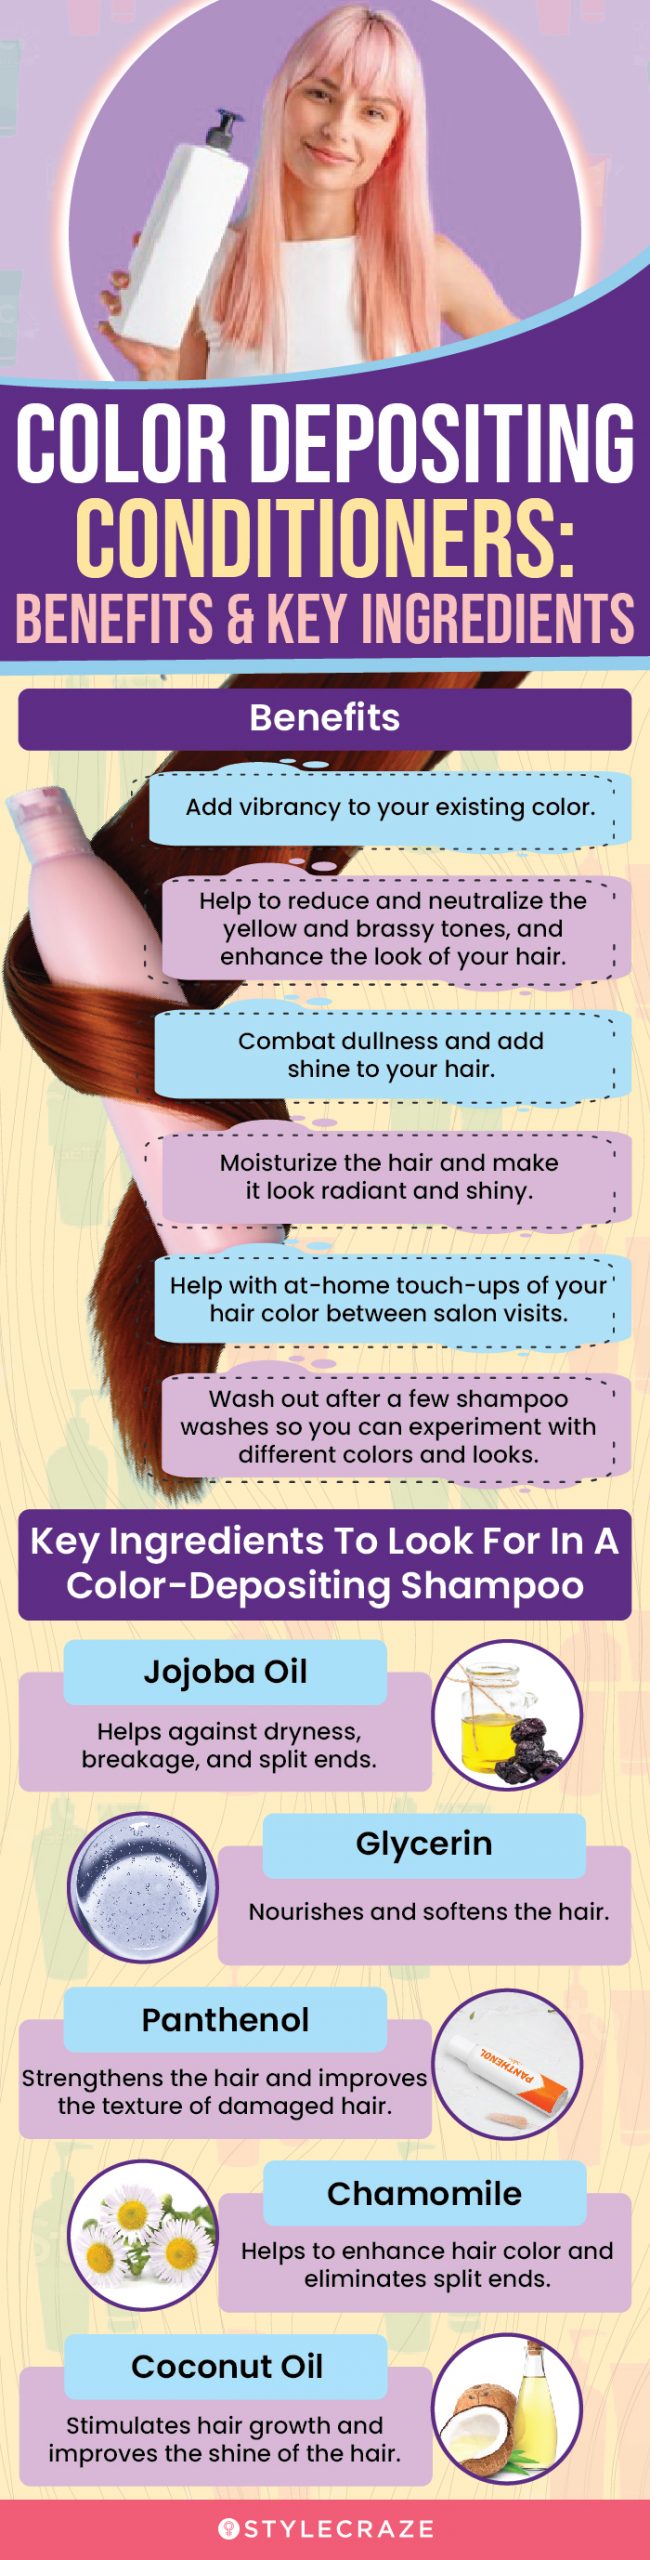 Color Depositing Conditioners: Benefits & Key Ingredients